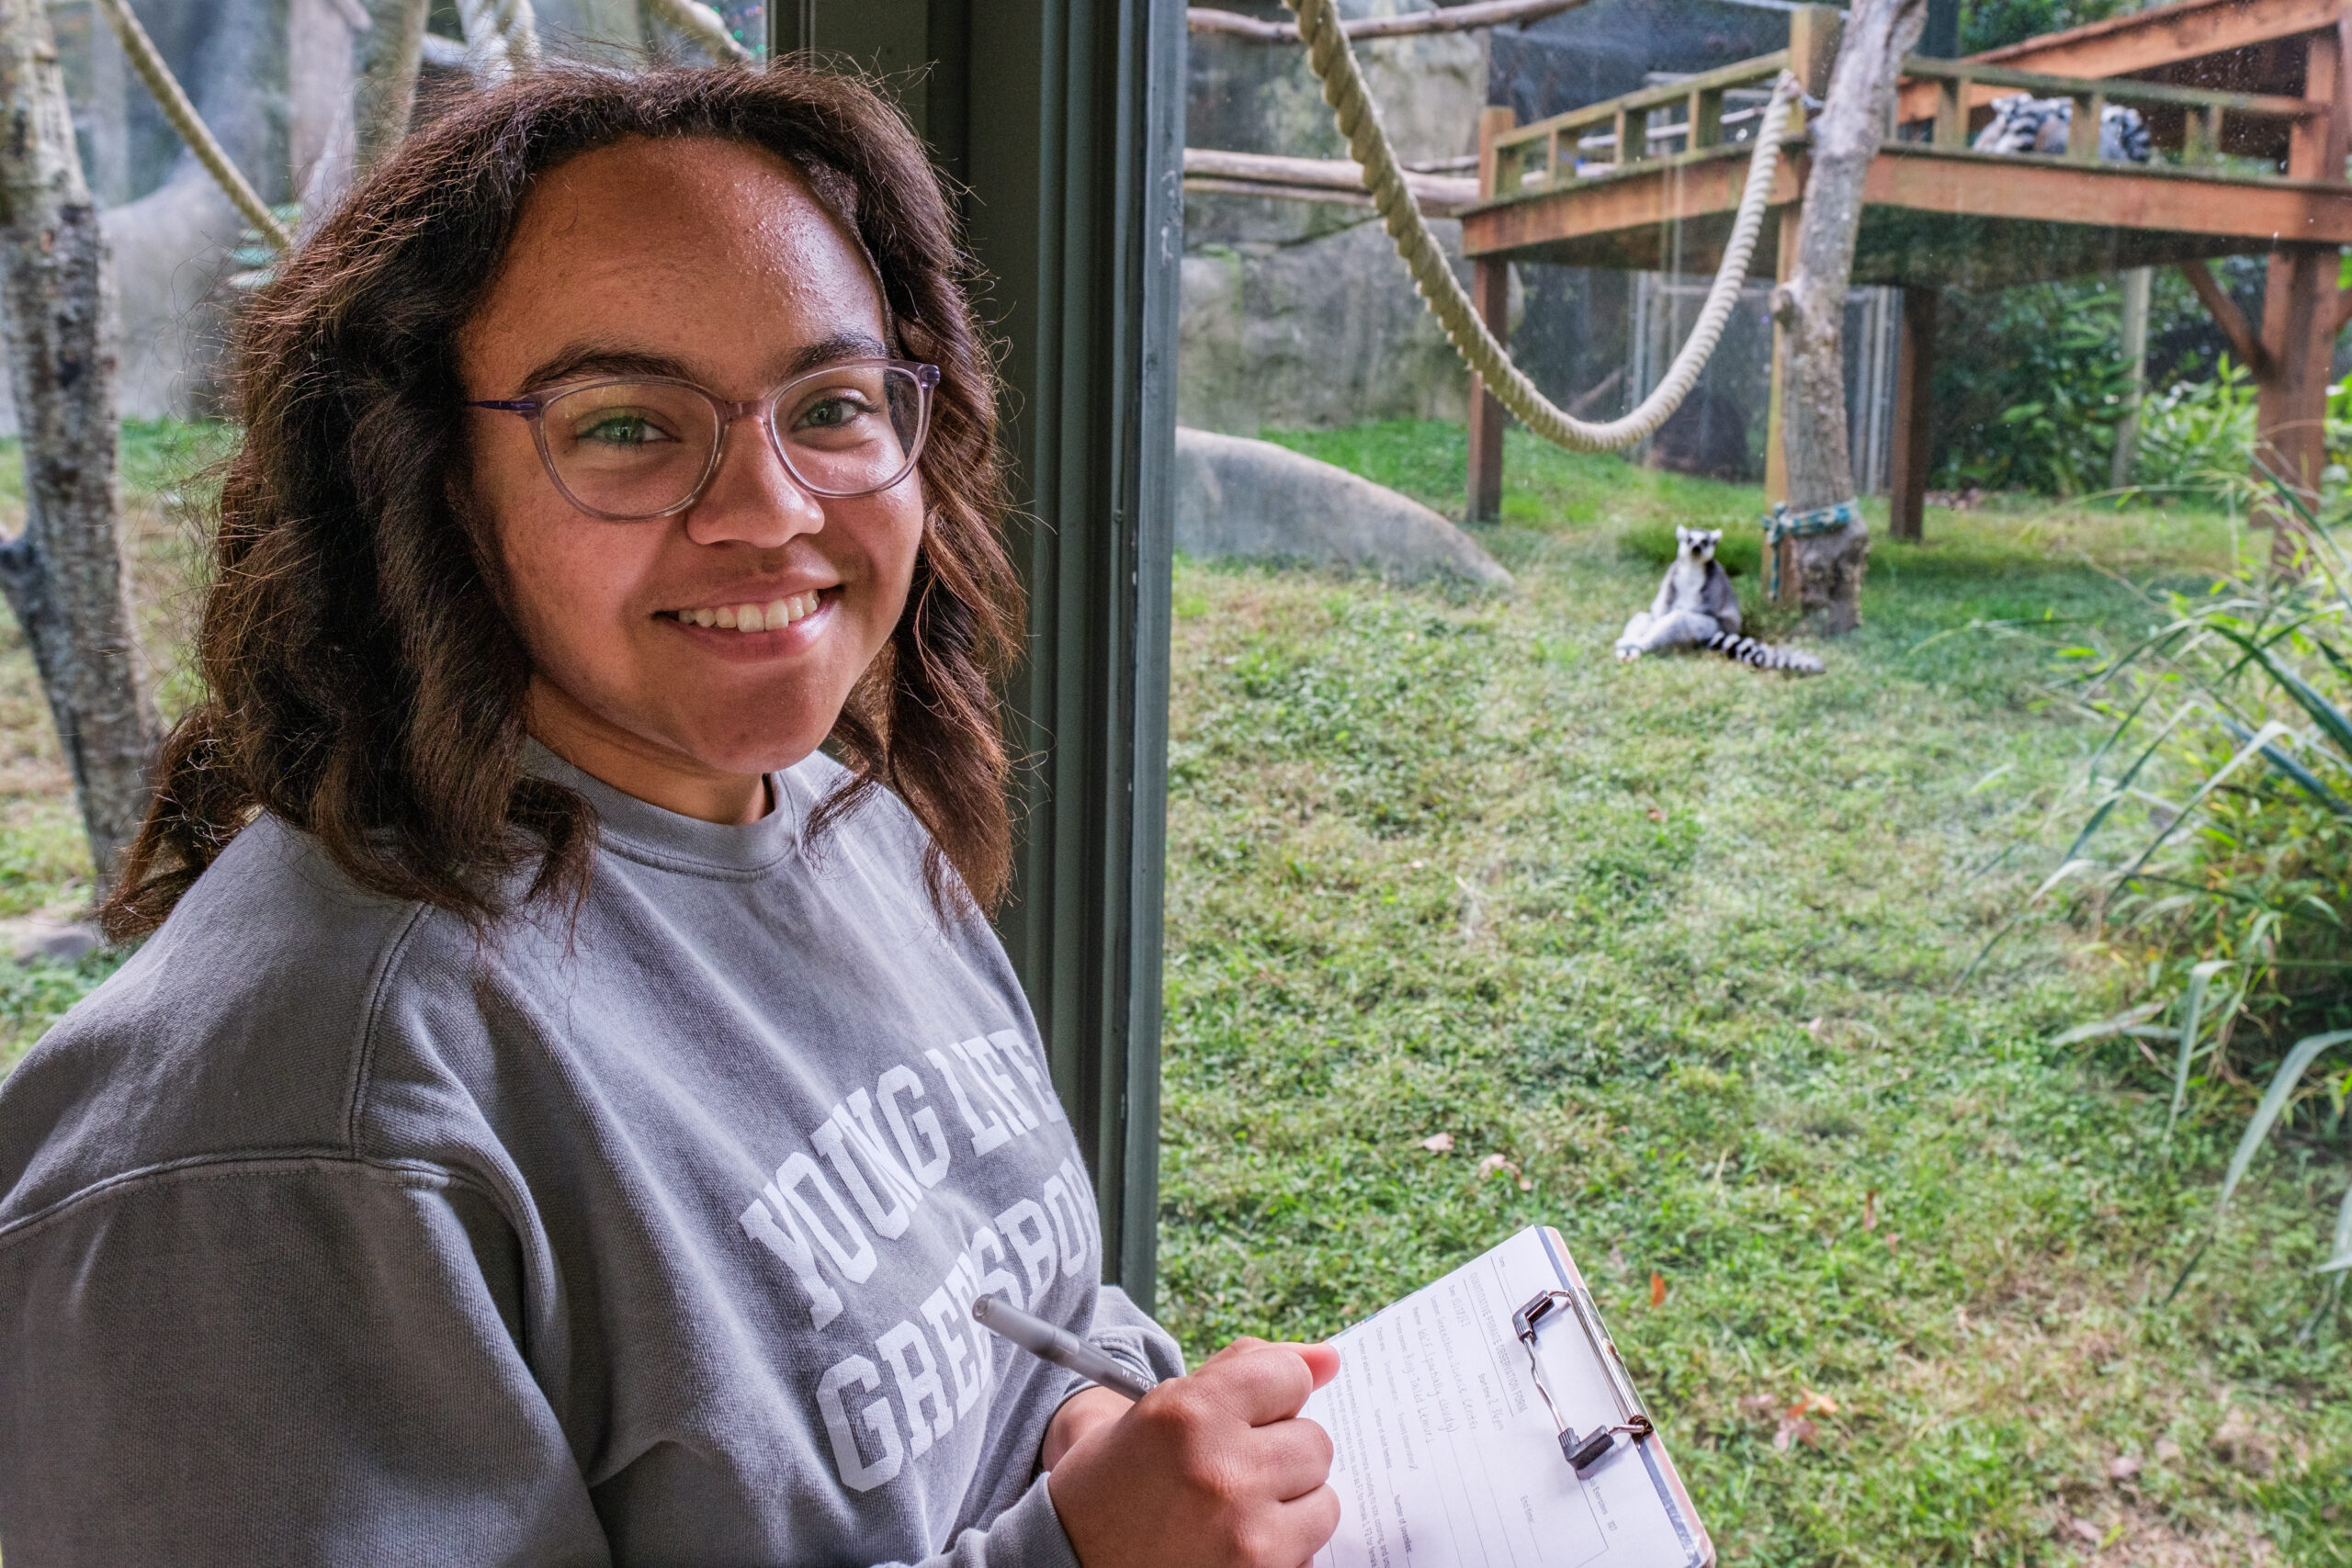 Student smiles holding clipboard in front of a glass-enclosure at the zoo. Behind the glass is a lemur looking towards her.